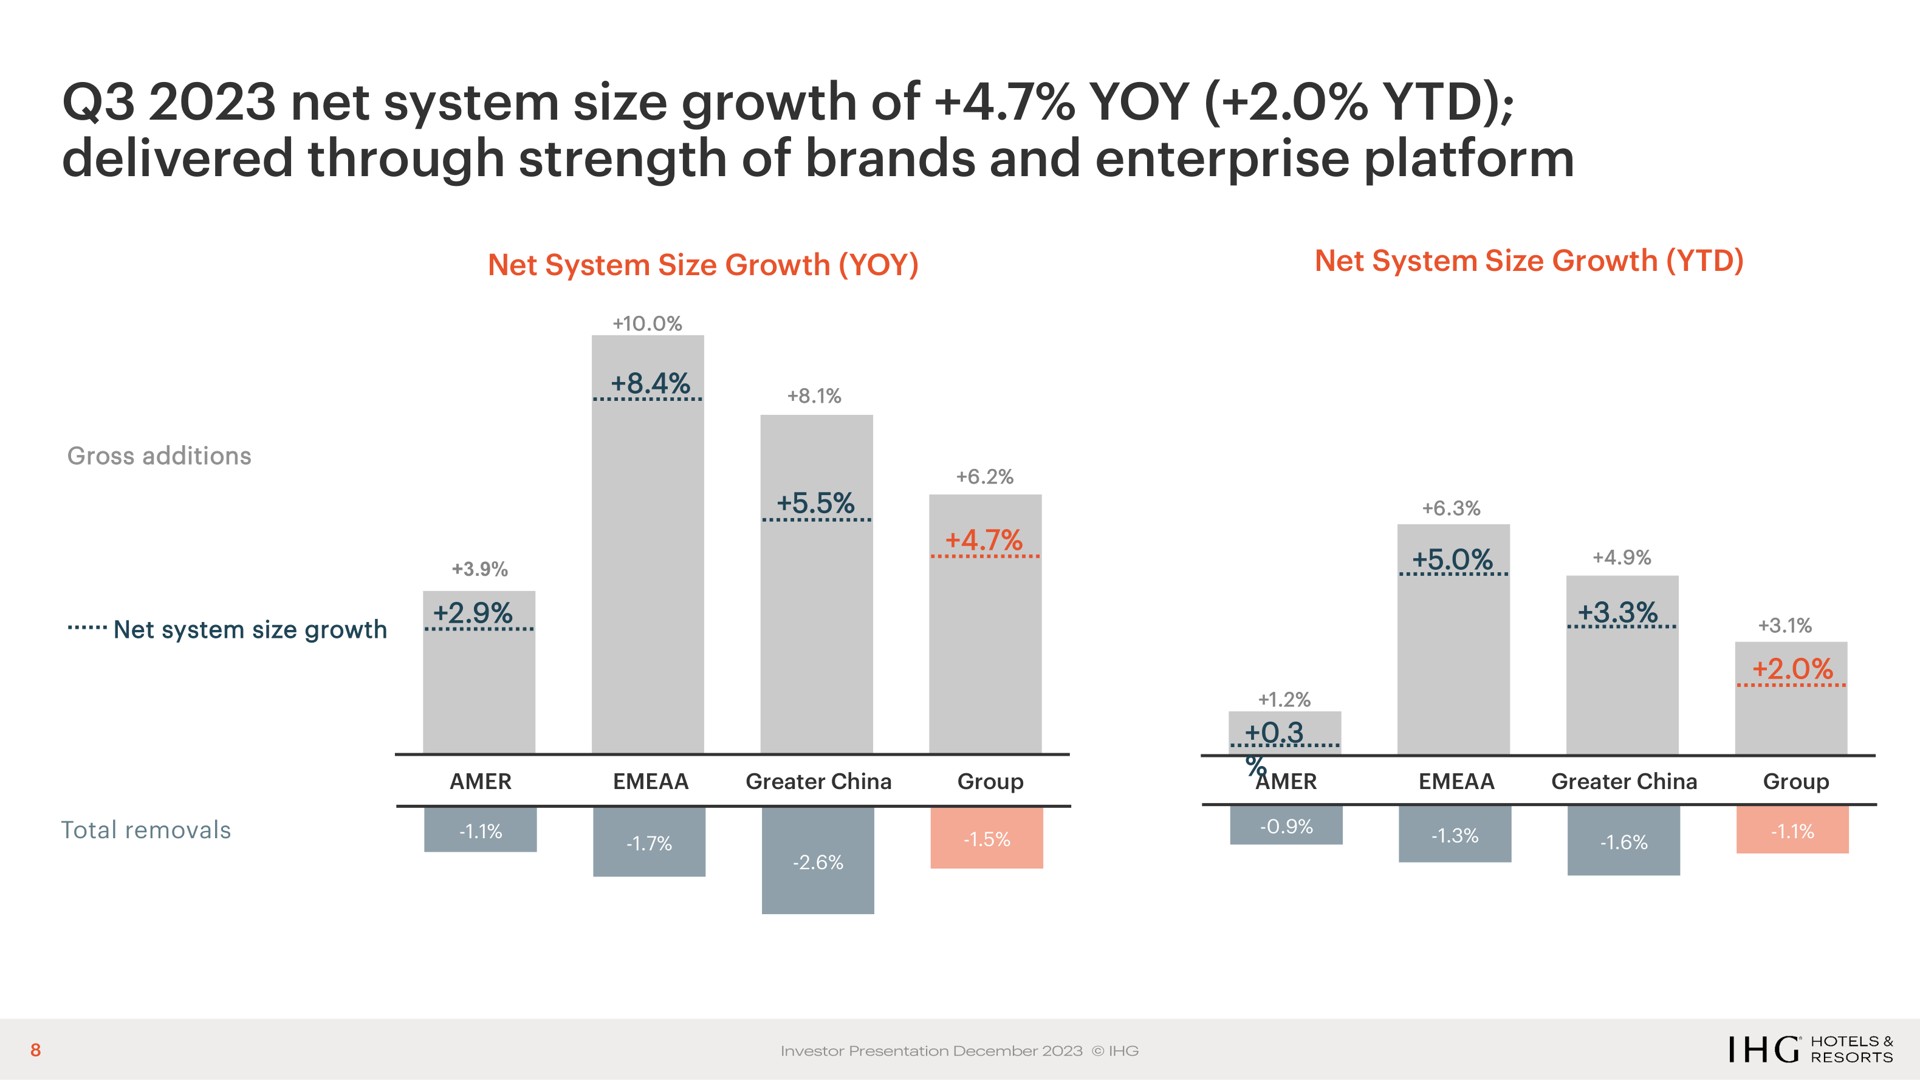 net system size growth of yoy delivered through strength of brands and enterprise platform | IHG Hotels